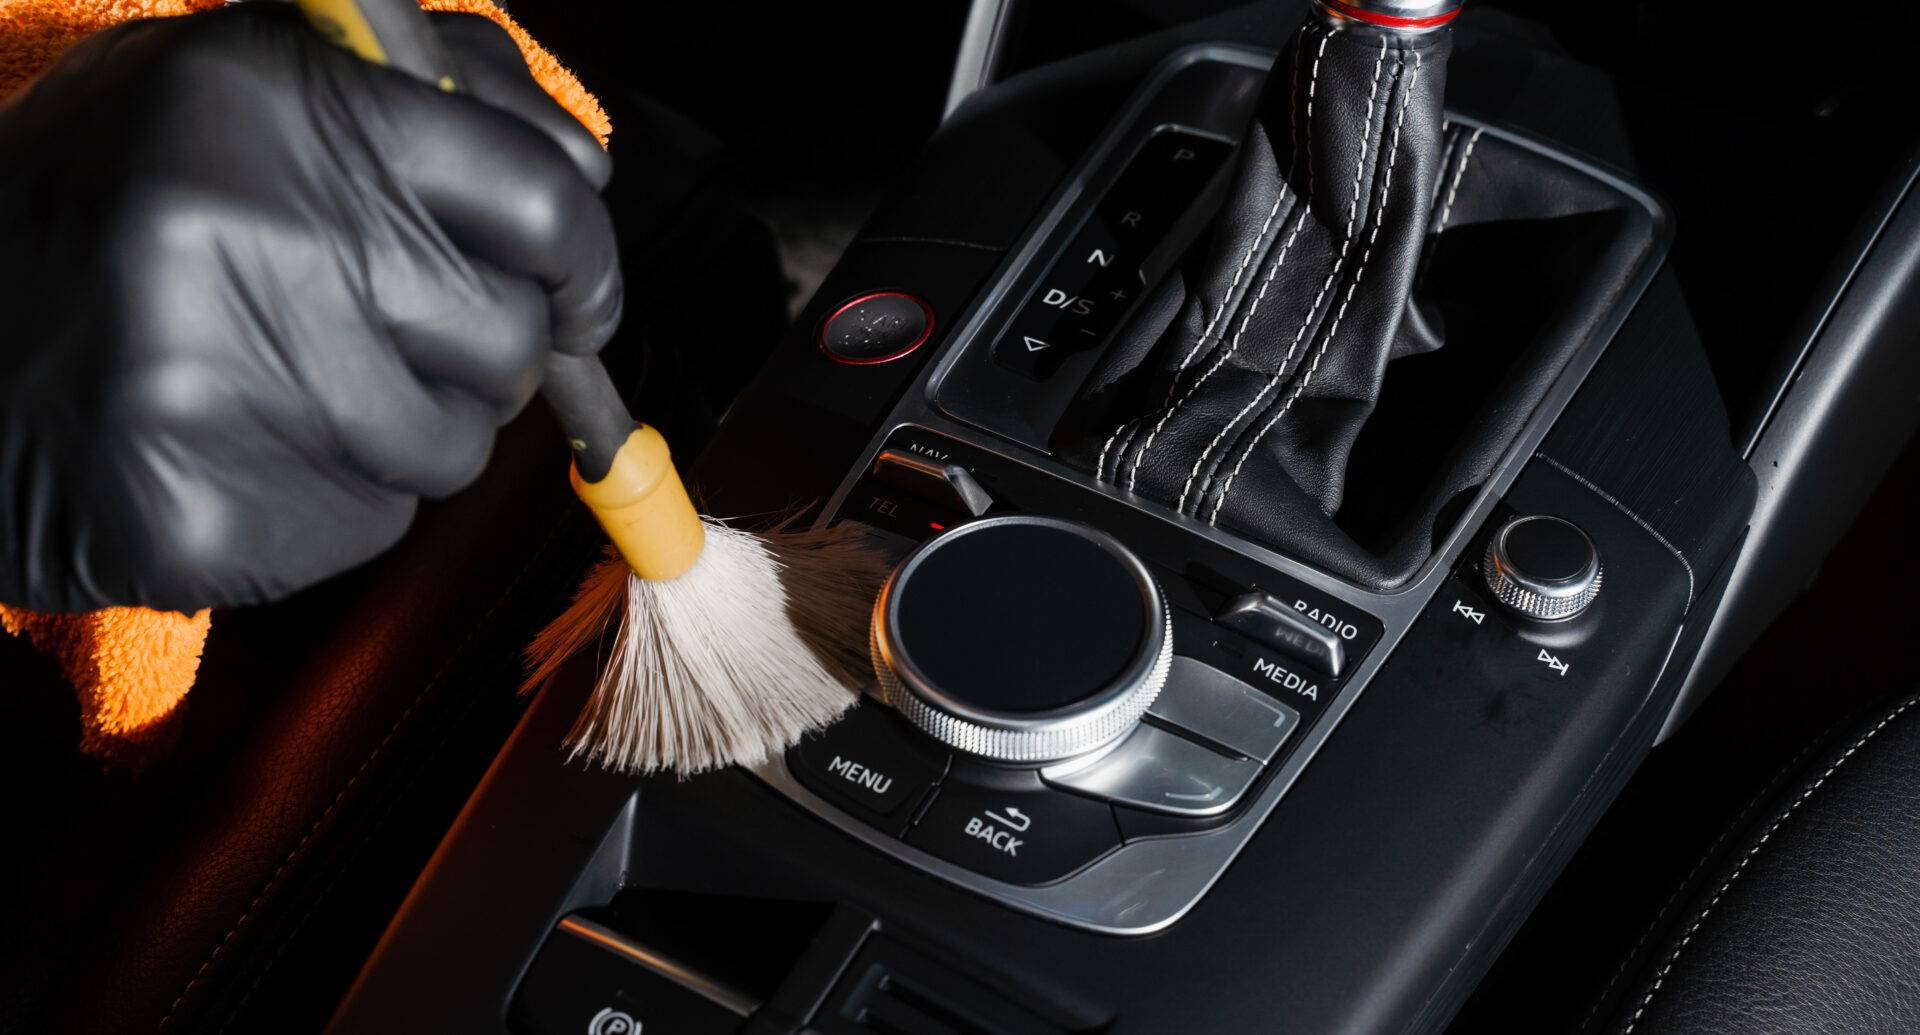 Dry cleaning with brush of gearbox and dashboard in car. Auto detailing service. Cleaning individual elements of black leather interior in auto.